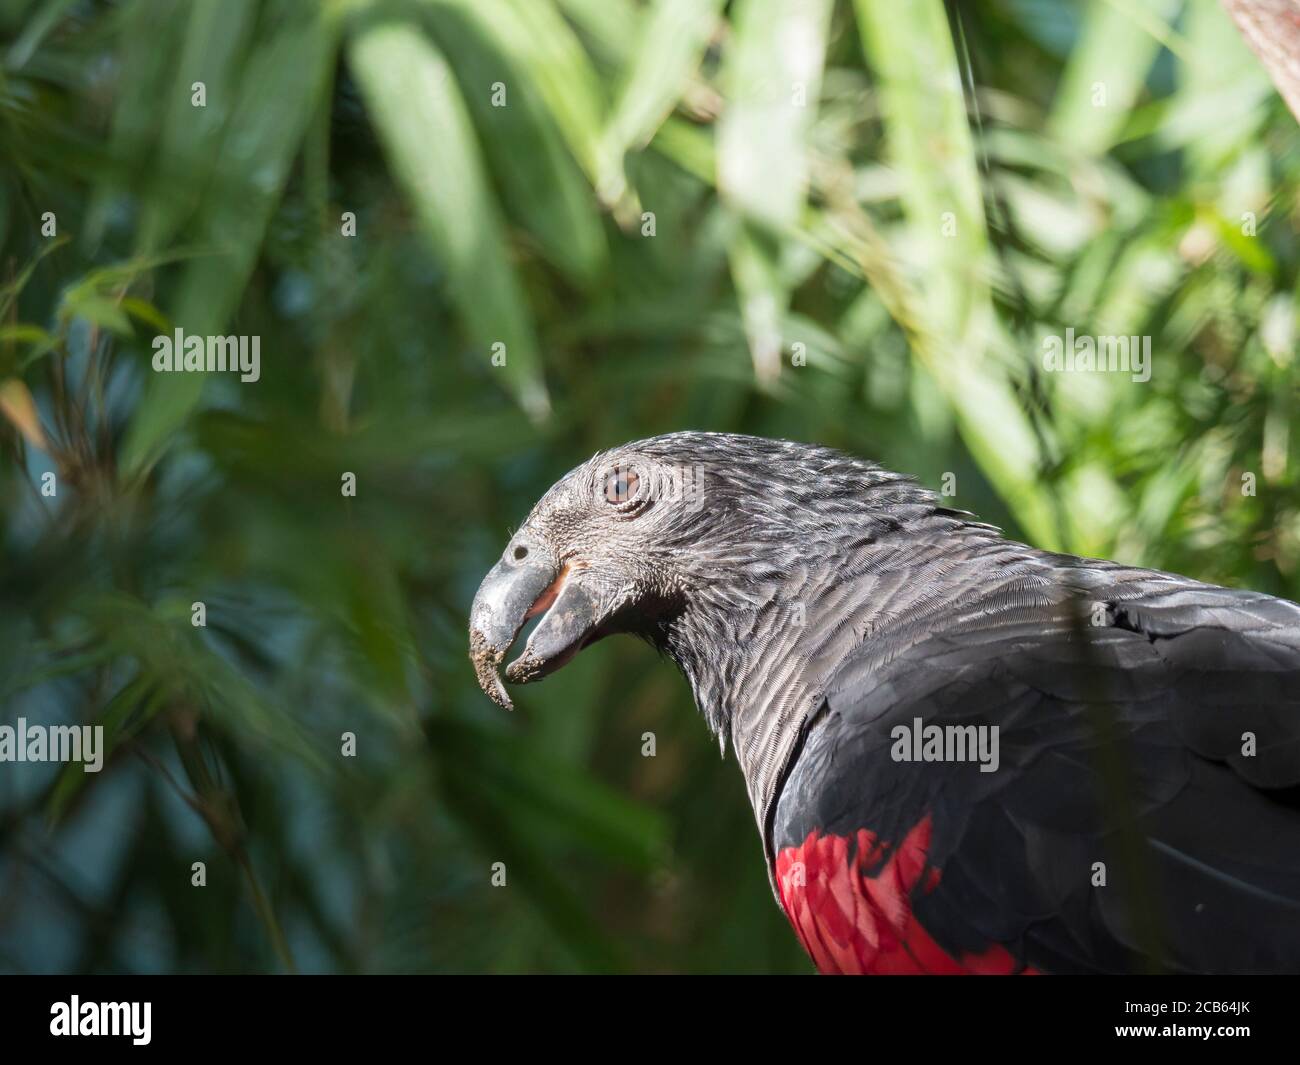 close up portrait of Pesquet parrot, Psittrichas fulgidus, rare bird from New Guinea. Red and black parrot head on green leaves bokeh background Stock Photo